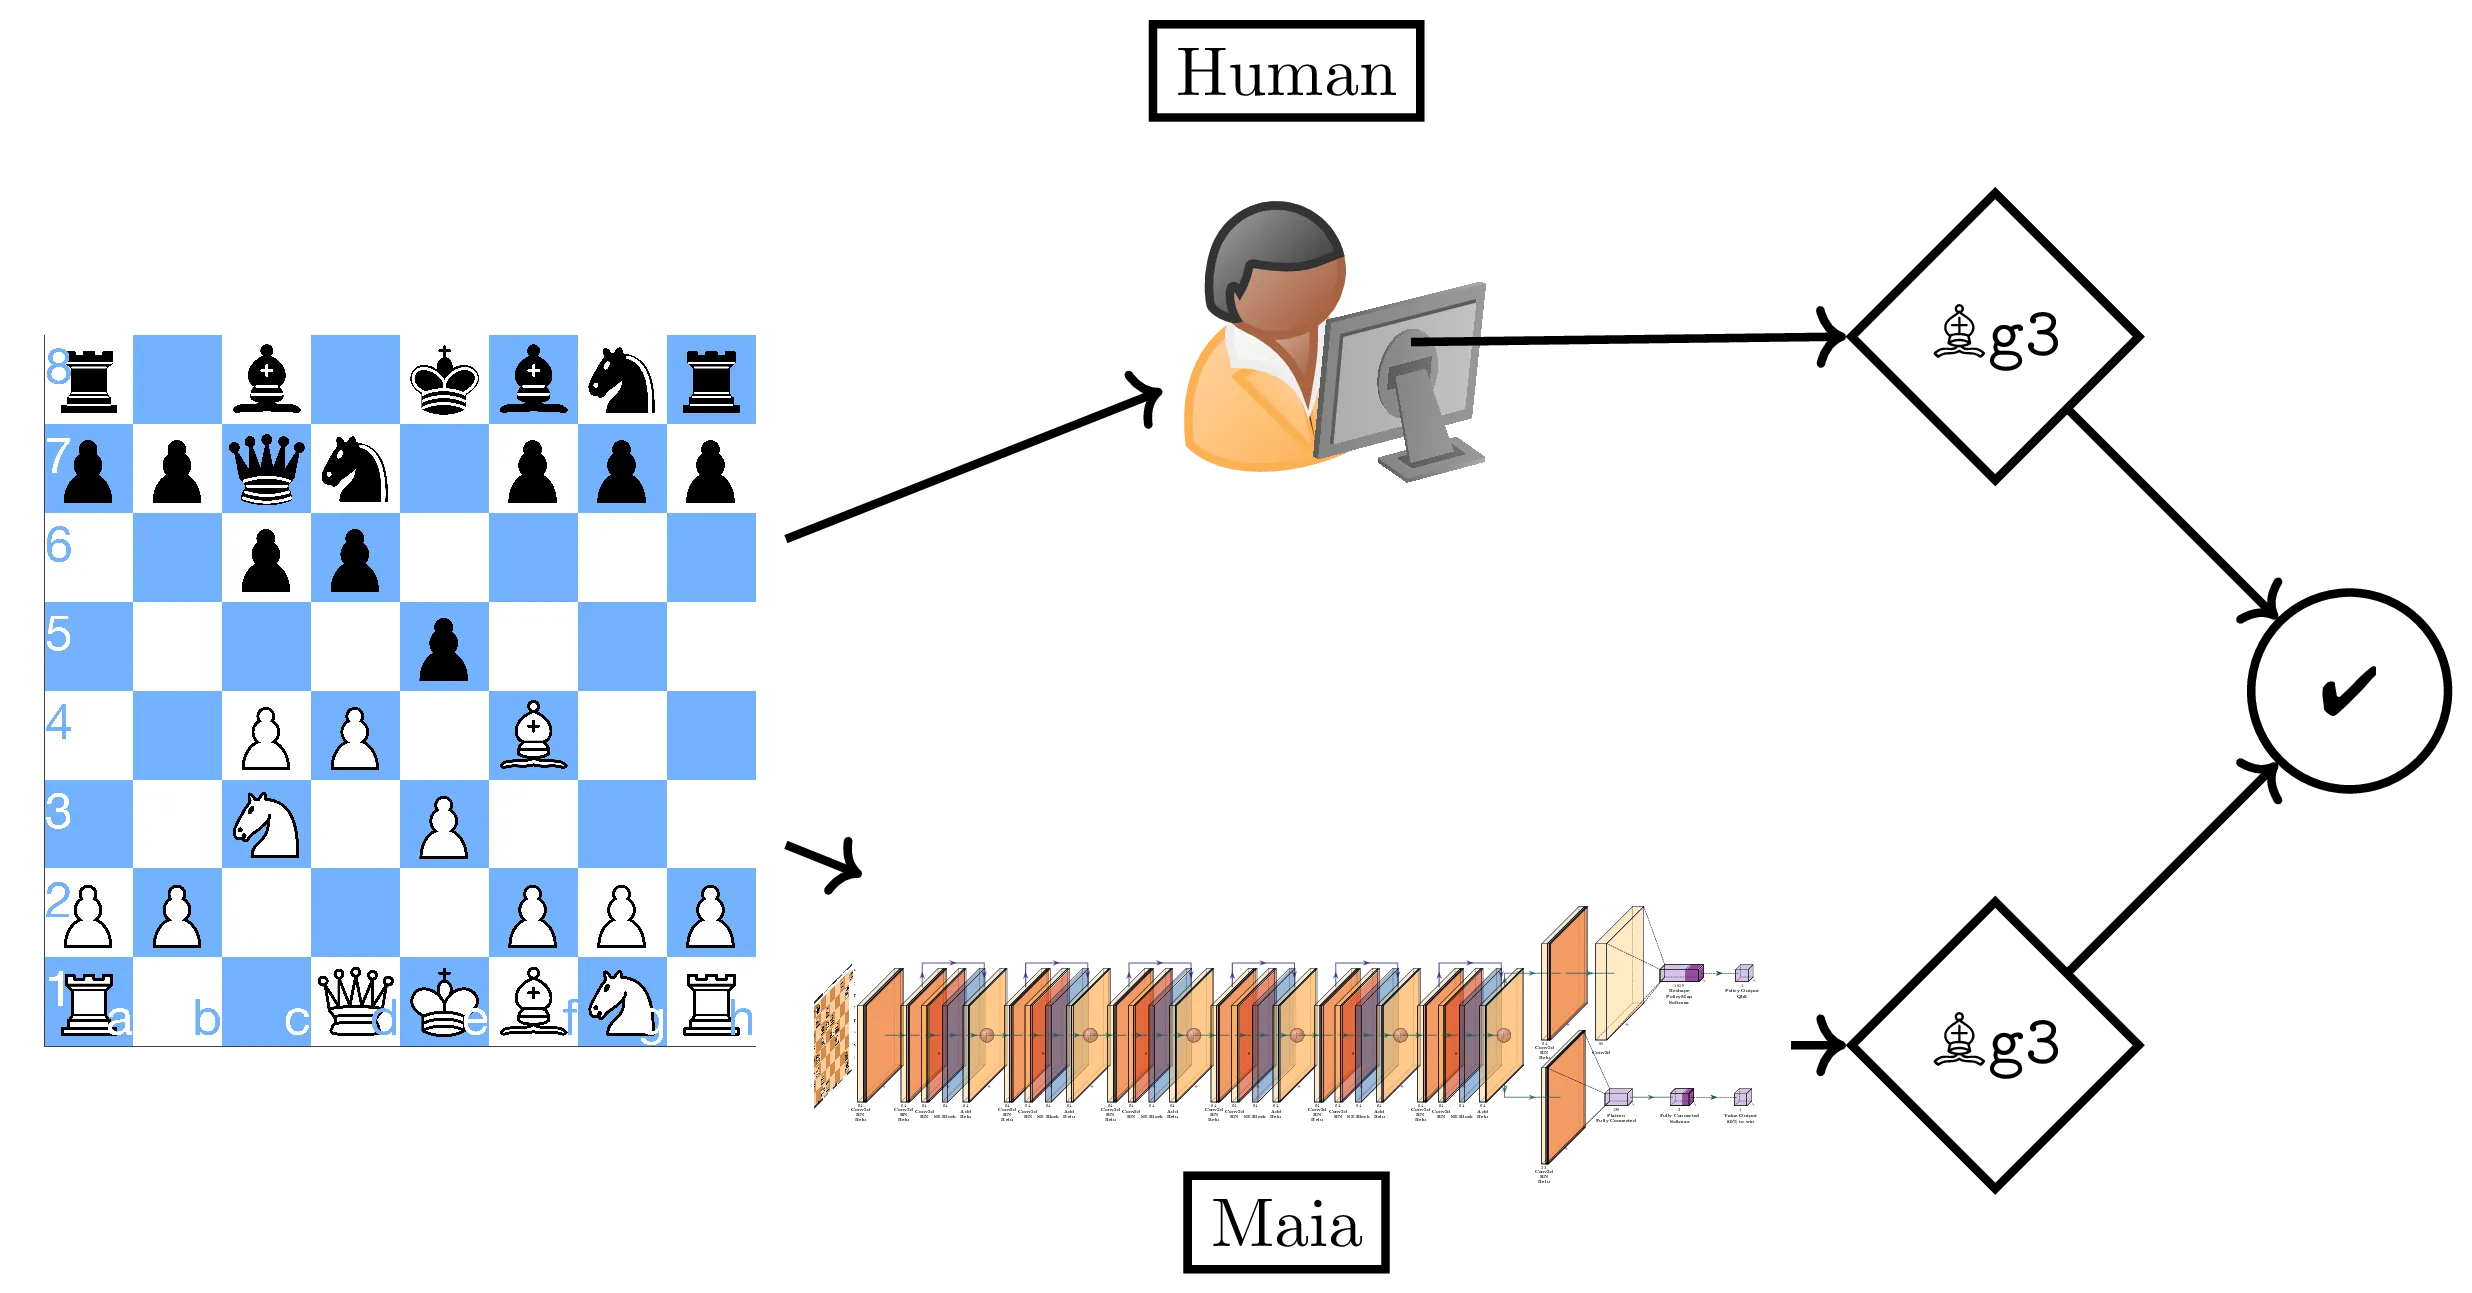 Computers Still Dominate Human Opponents In Chess : All Tech